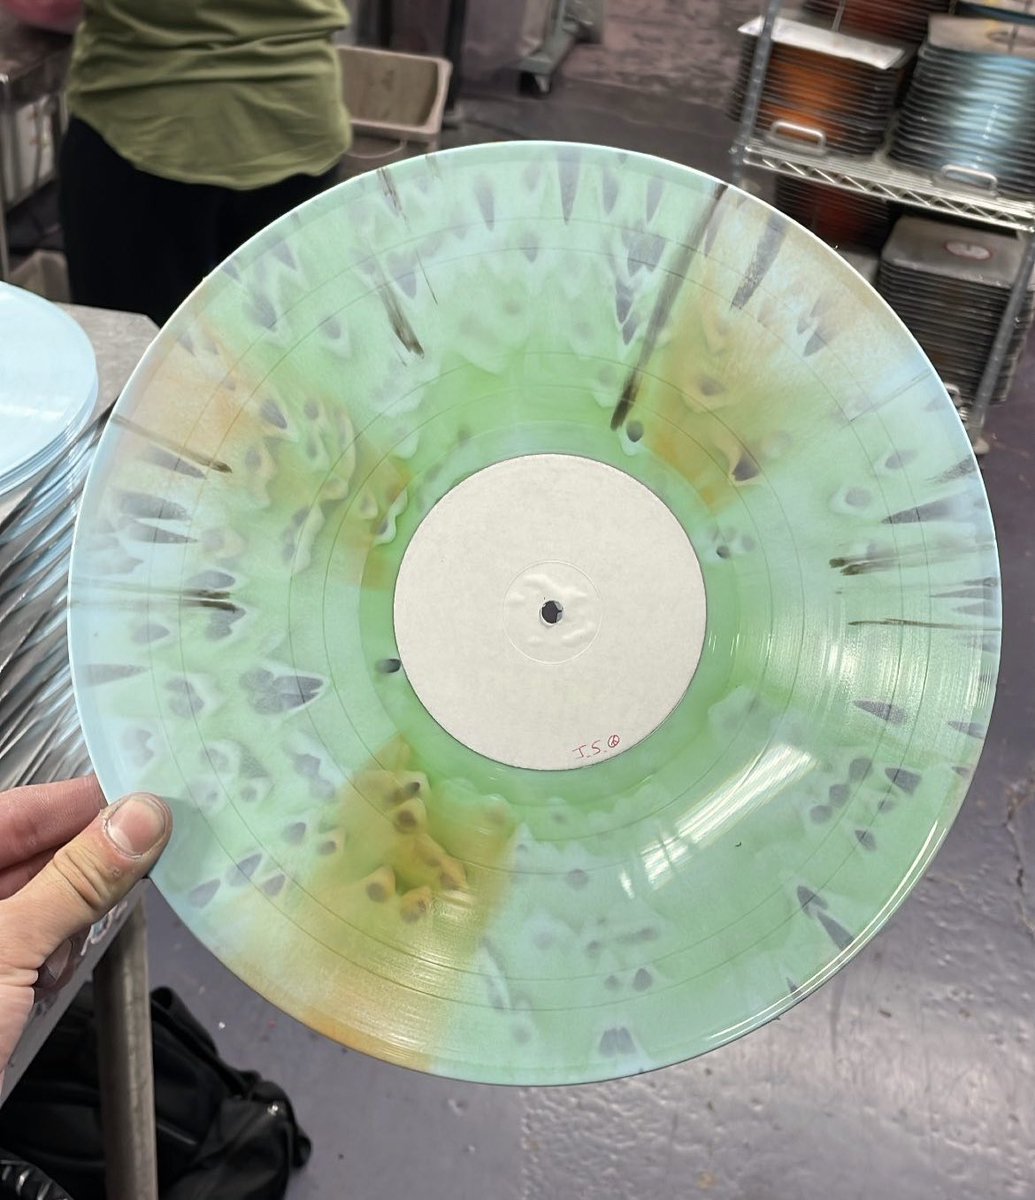 Our friends at @microforumvinyl have been cooking up some beauties lately! They press a ton of #RSDC titles. Check them out and follow them to see their latest #vinyl creations! 

#vinylrecords #vinylrecord #madeatmicroforum #music #records #vinylcommunity